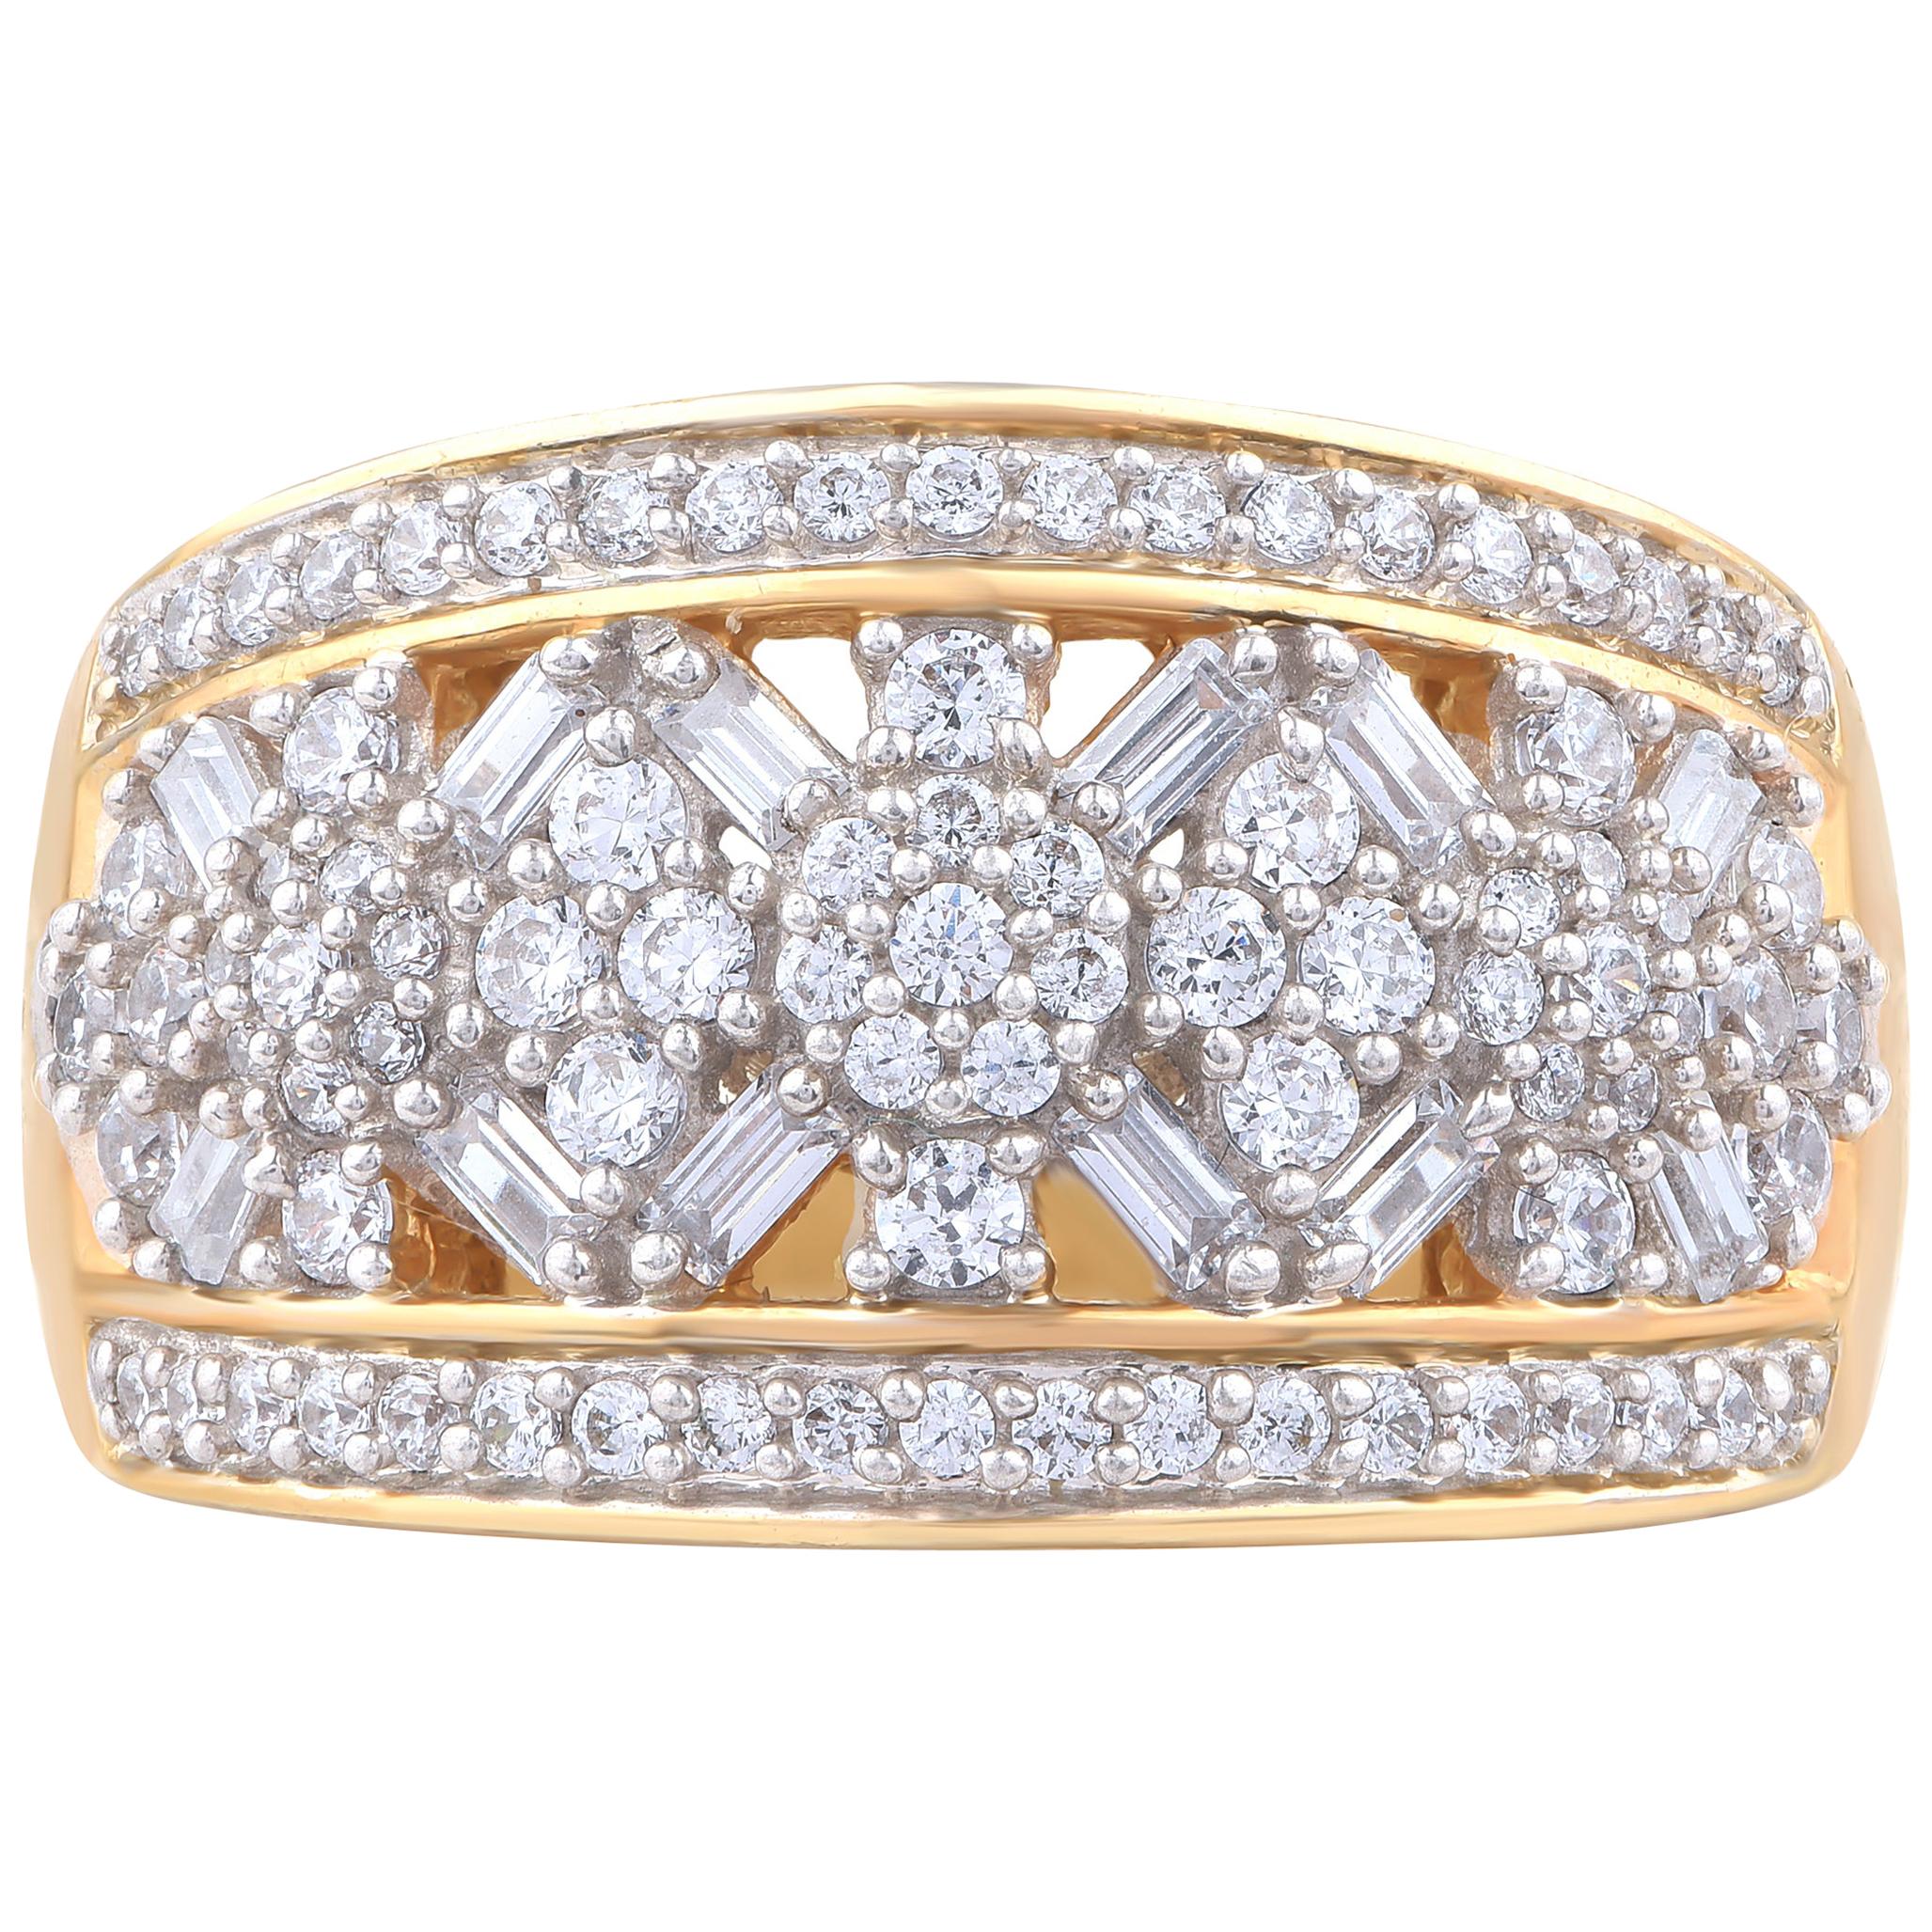 TJD 1.00Carat Round and Baguette Diamond 18 K Yellow Gold Composite Wedding Band